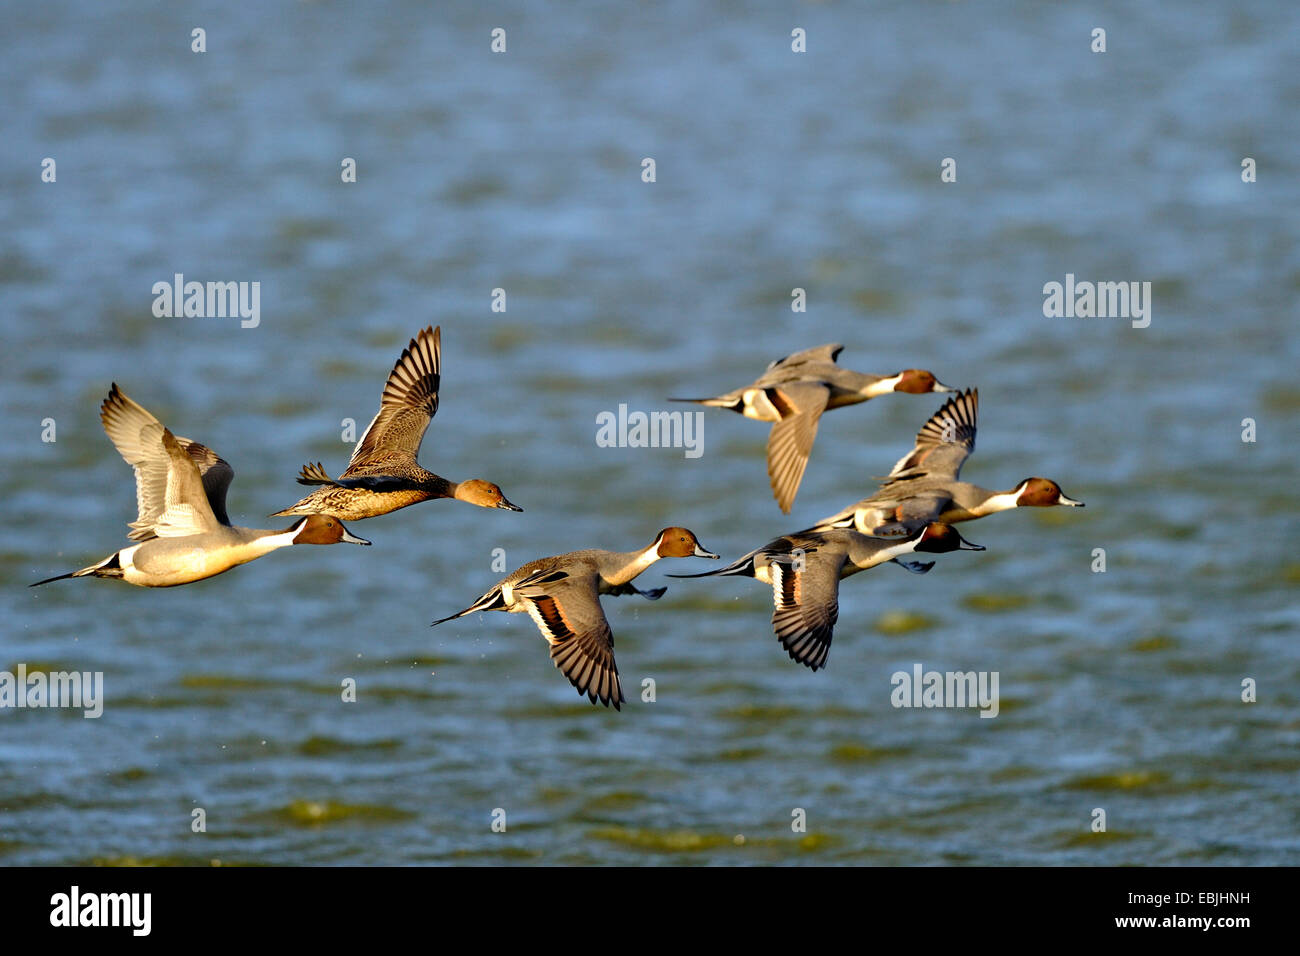 northern pintail (Anas acuta), flying above water, Netherlands, Texel Stock Photo